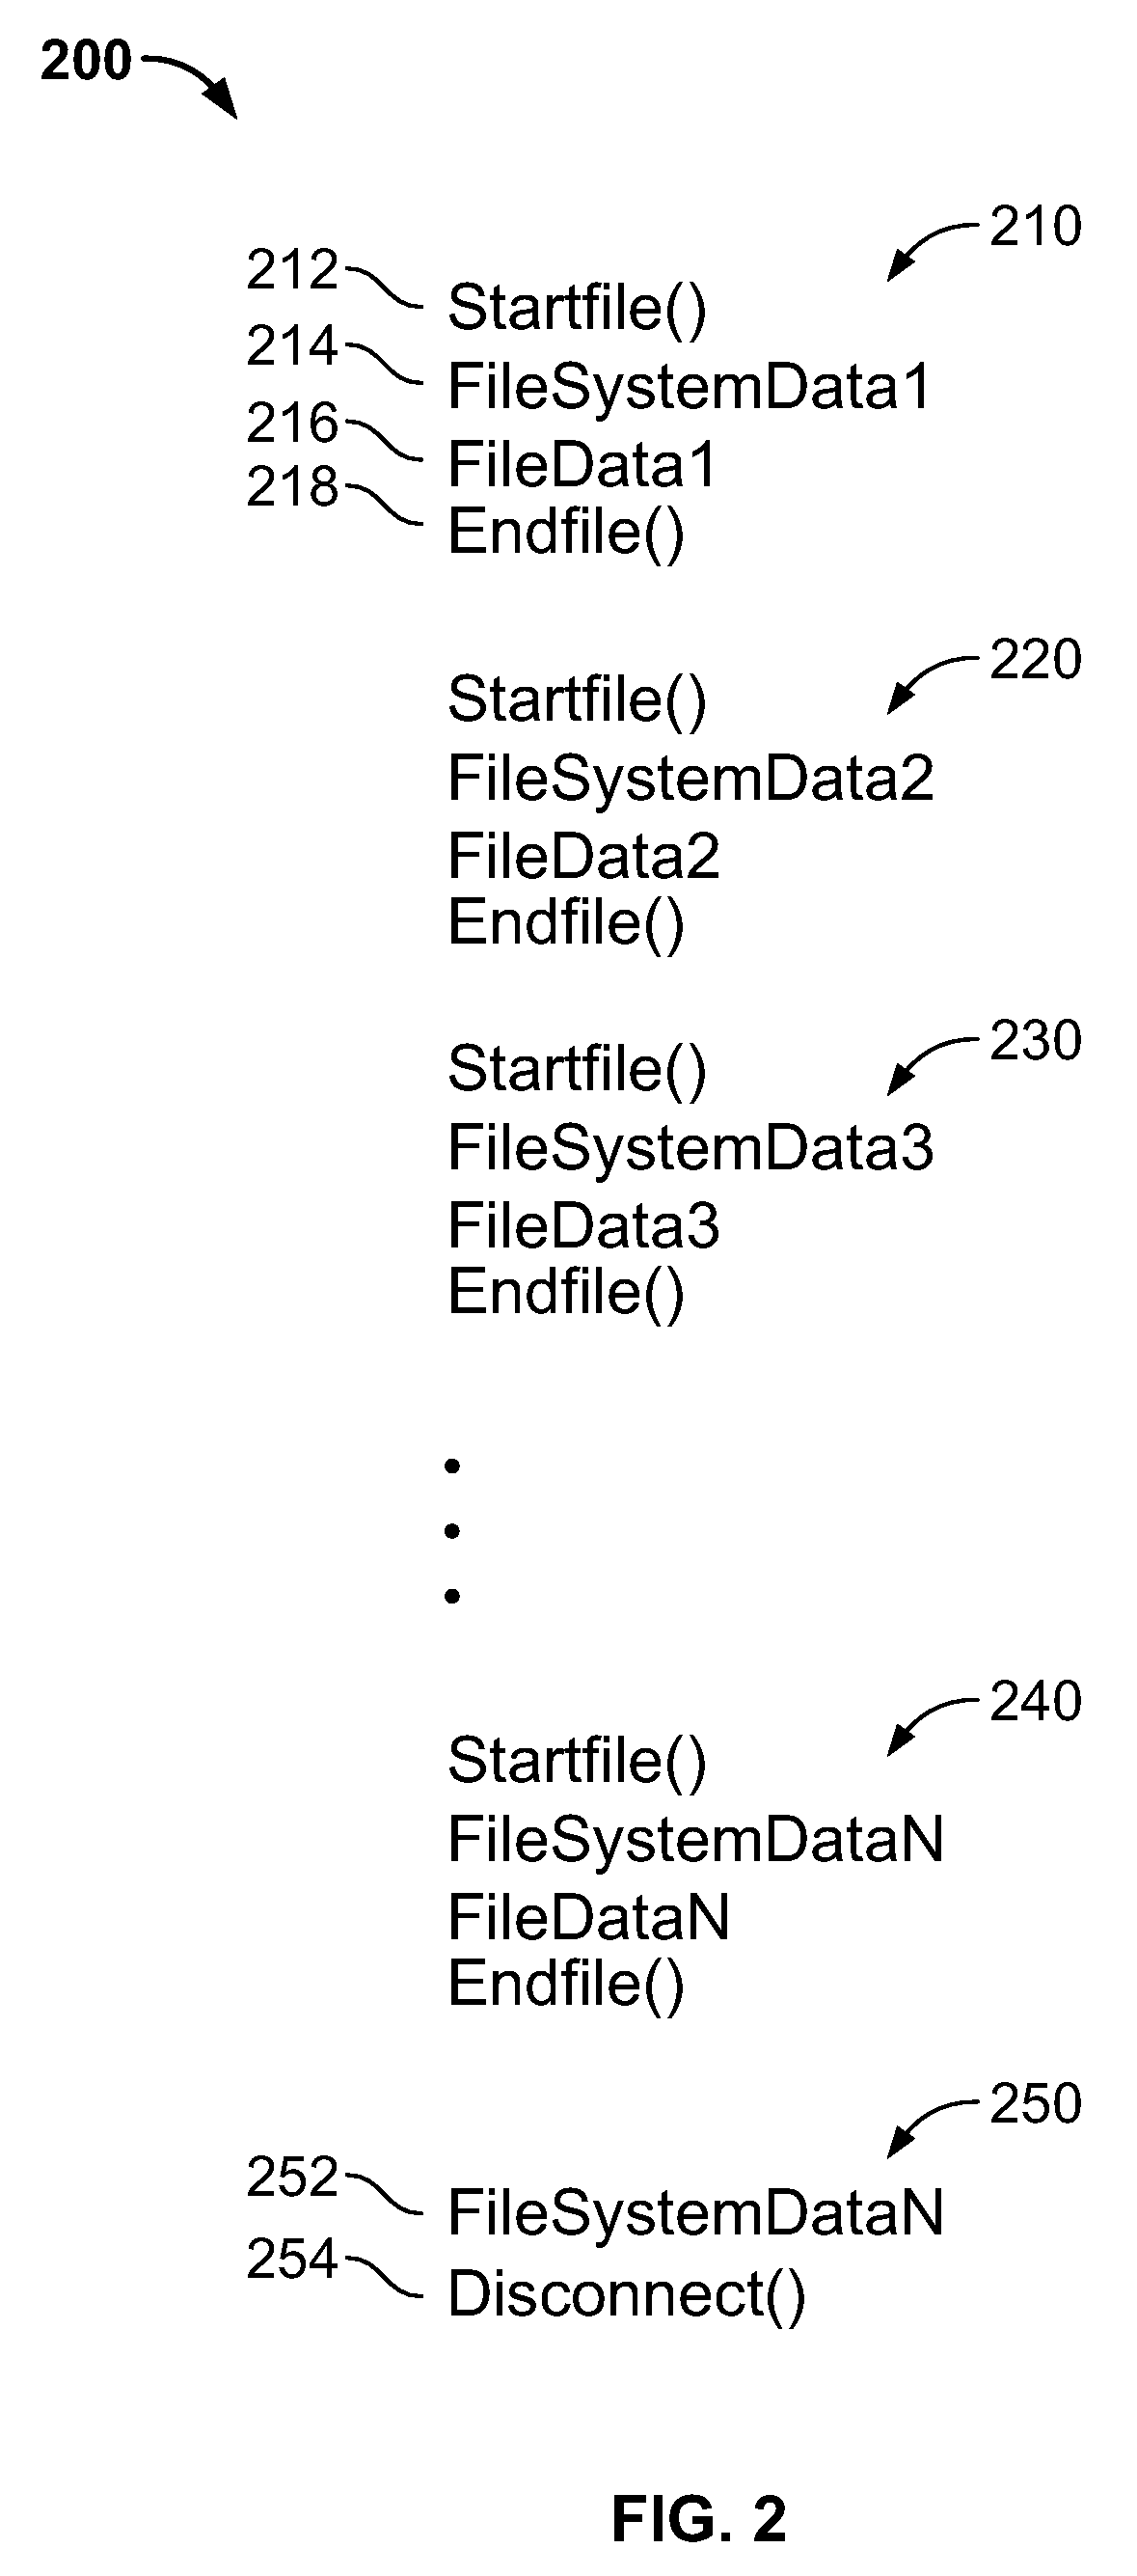 Systems and methods for sideband communication between device and host to minimize file corruption